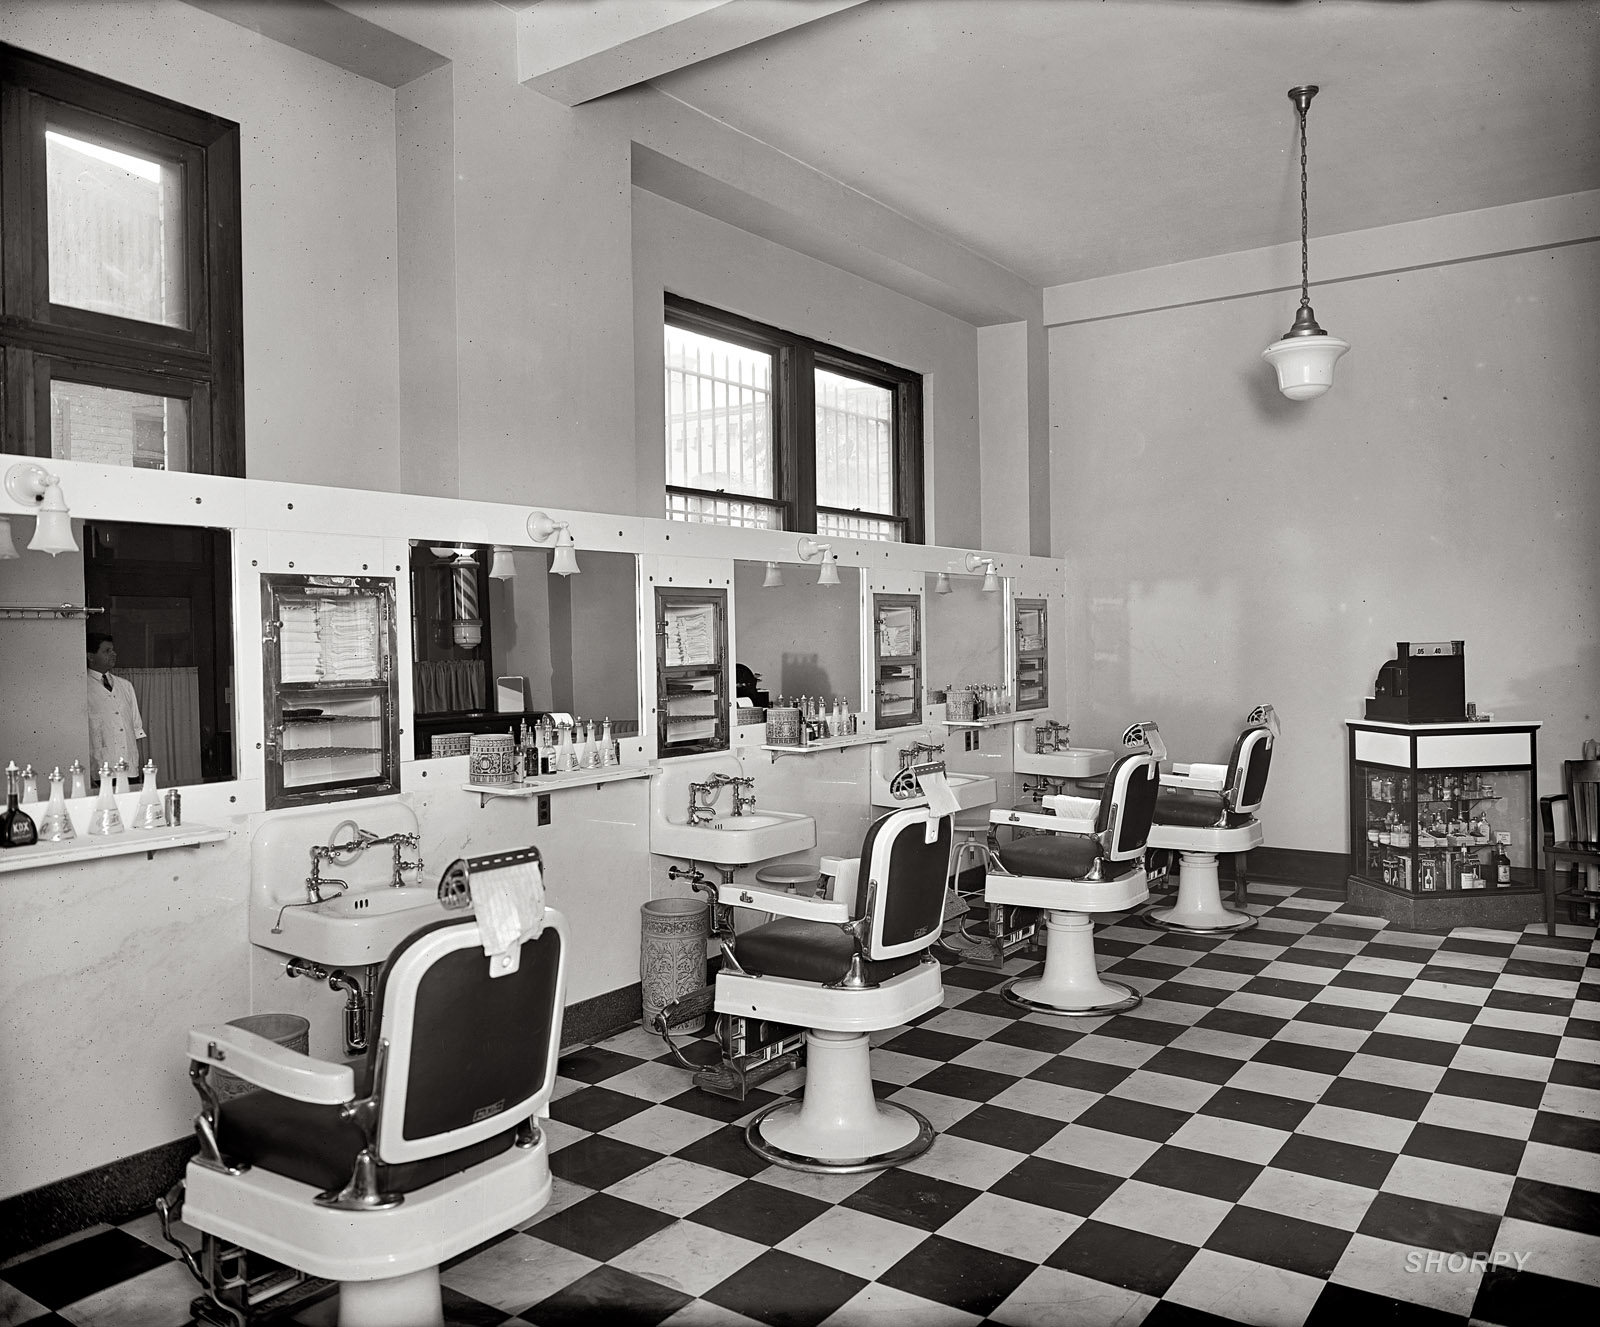 Washington, D.C., circa 1925. "Barbershop, Investment Building," 15th and K Streets N.W. National Photo Company Collection glass negative. View full size.